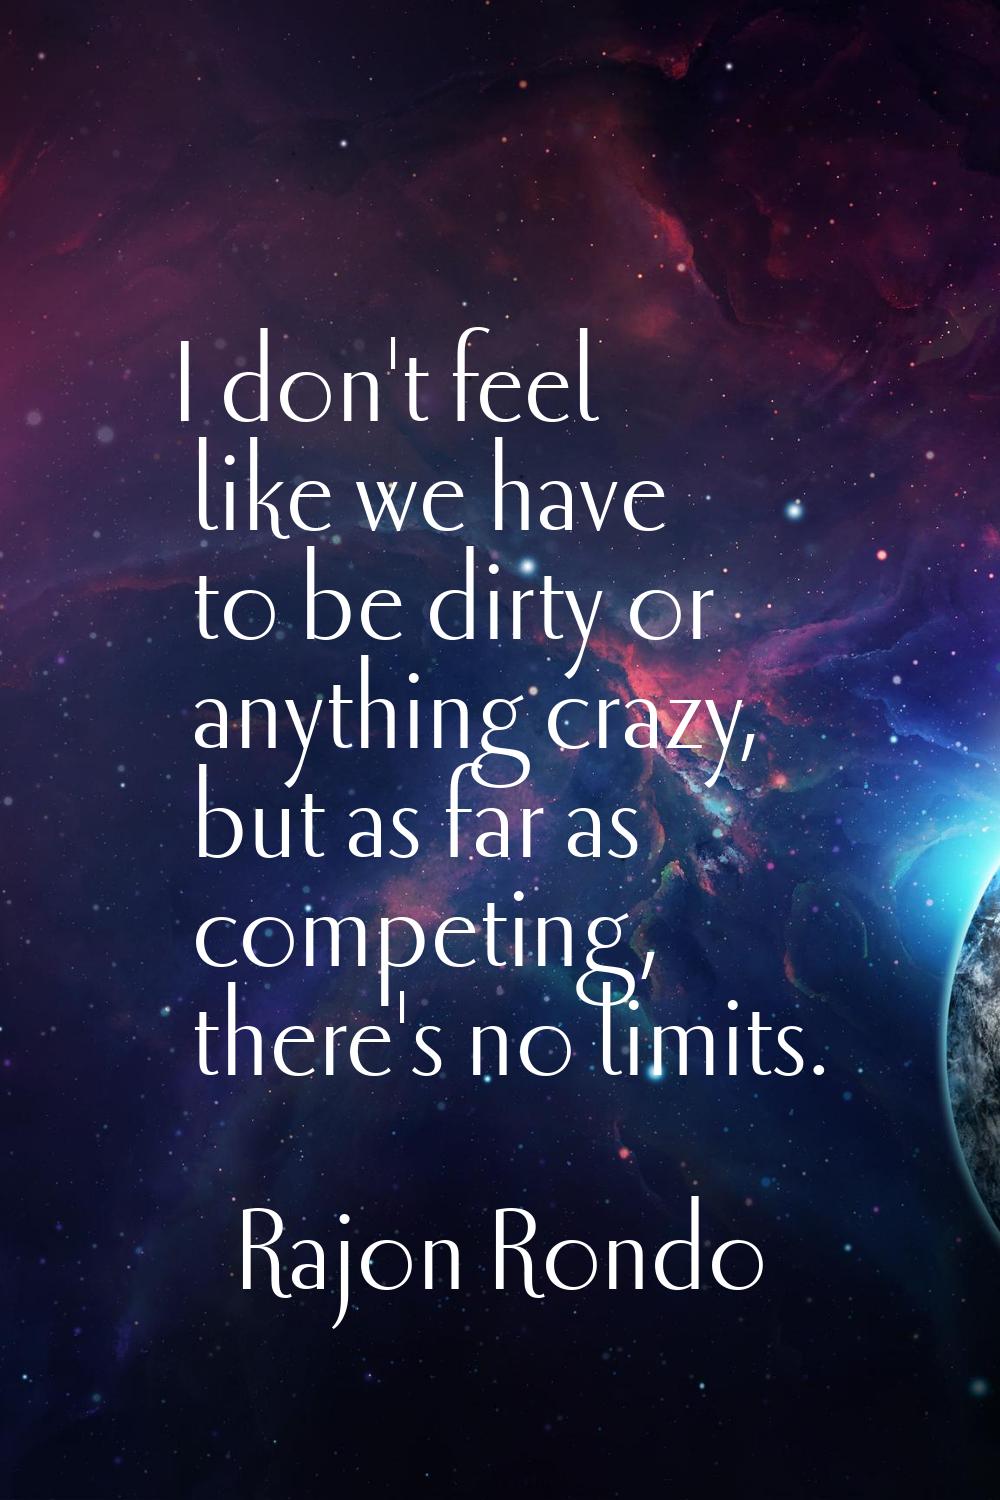 I don't feel like we have to be dirty or anything crazy, but as far as competing, there's no limits